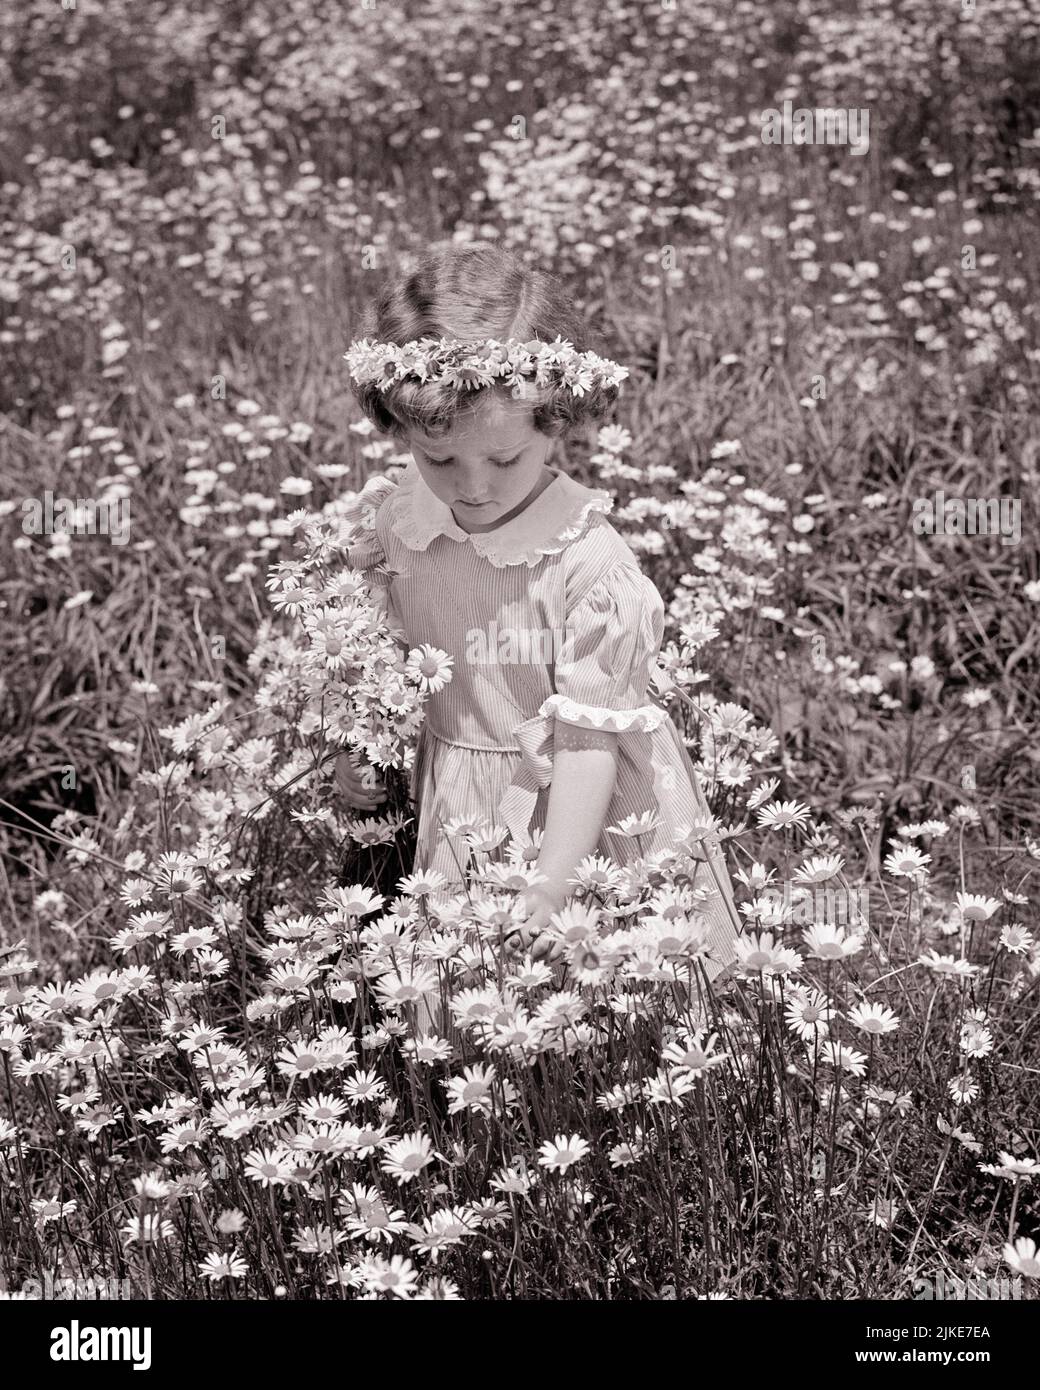 1940s 1950s LITTLE GIRL PICKING FLOWERS IN A FIELD OF DAISIES WEARING A DAISY CROWN - j1508 HAR001 HARS INSPIRATION SYMBOLS SPIRITUALITY CONFIDENCE B&W DAISY SUMMERTIME DAISIES FRESH DREAMS HAPPINESS ADVENTURE WHOLESOME GOOD LUCK CONCEPT CONCEPTUAL STYLISH SYMBOLIC AFFECTION CONCEPTS GROWTH IDYLLIC JUVENILES PERENNIAL SEASON SPRINGTIME BLACK AND WHITE CAUCASIAN ETHNICITY HAR001 INNOCENCE OLD FASHIONED PURITY REPRESENTATION Stock Photo